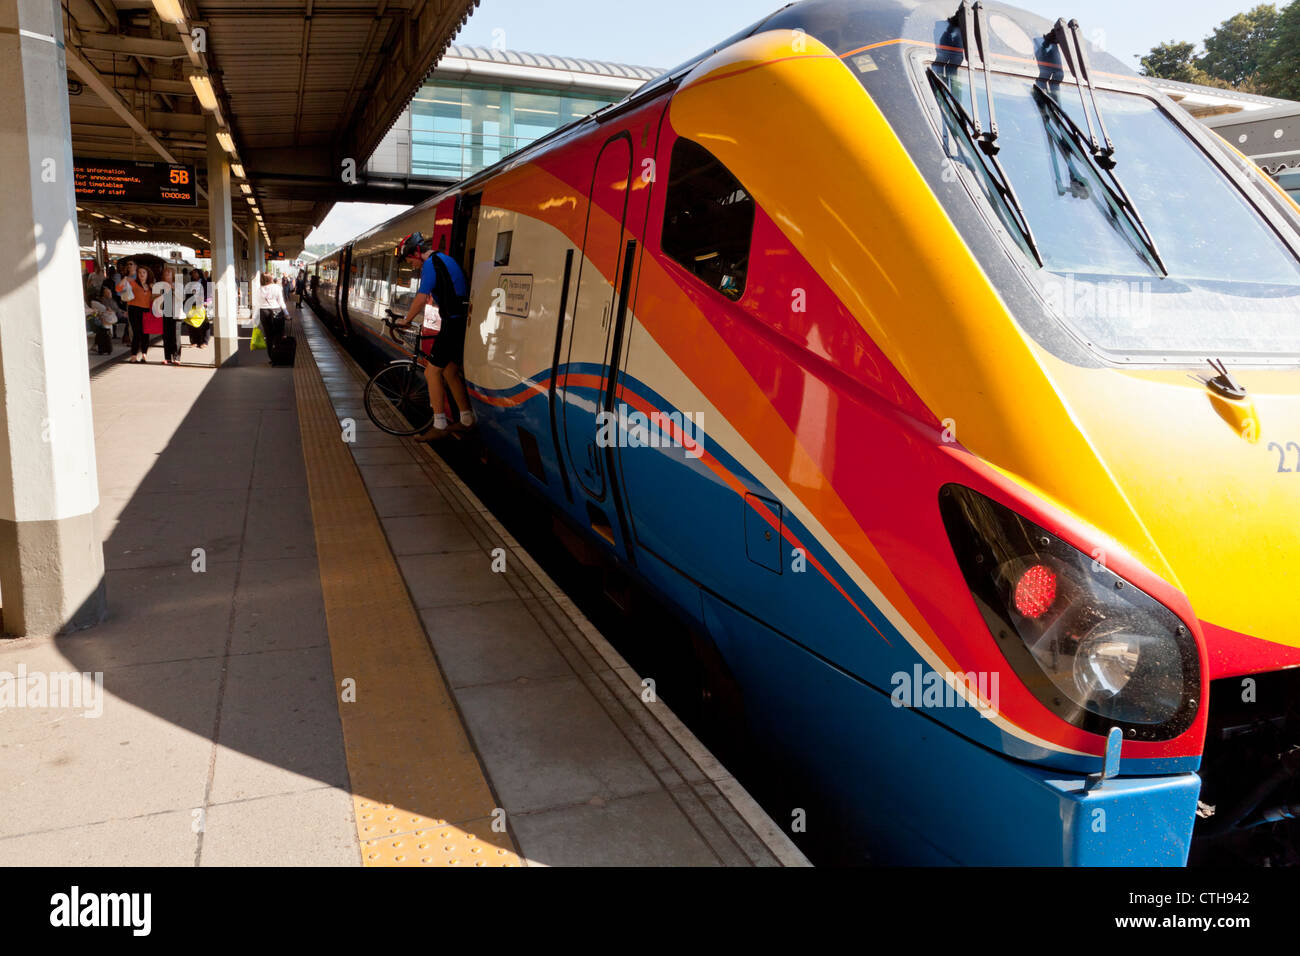 Passenger getting off an East Midlands Trains HST train with a bicycle, Sheffield Station, England, UK Stock Photo